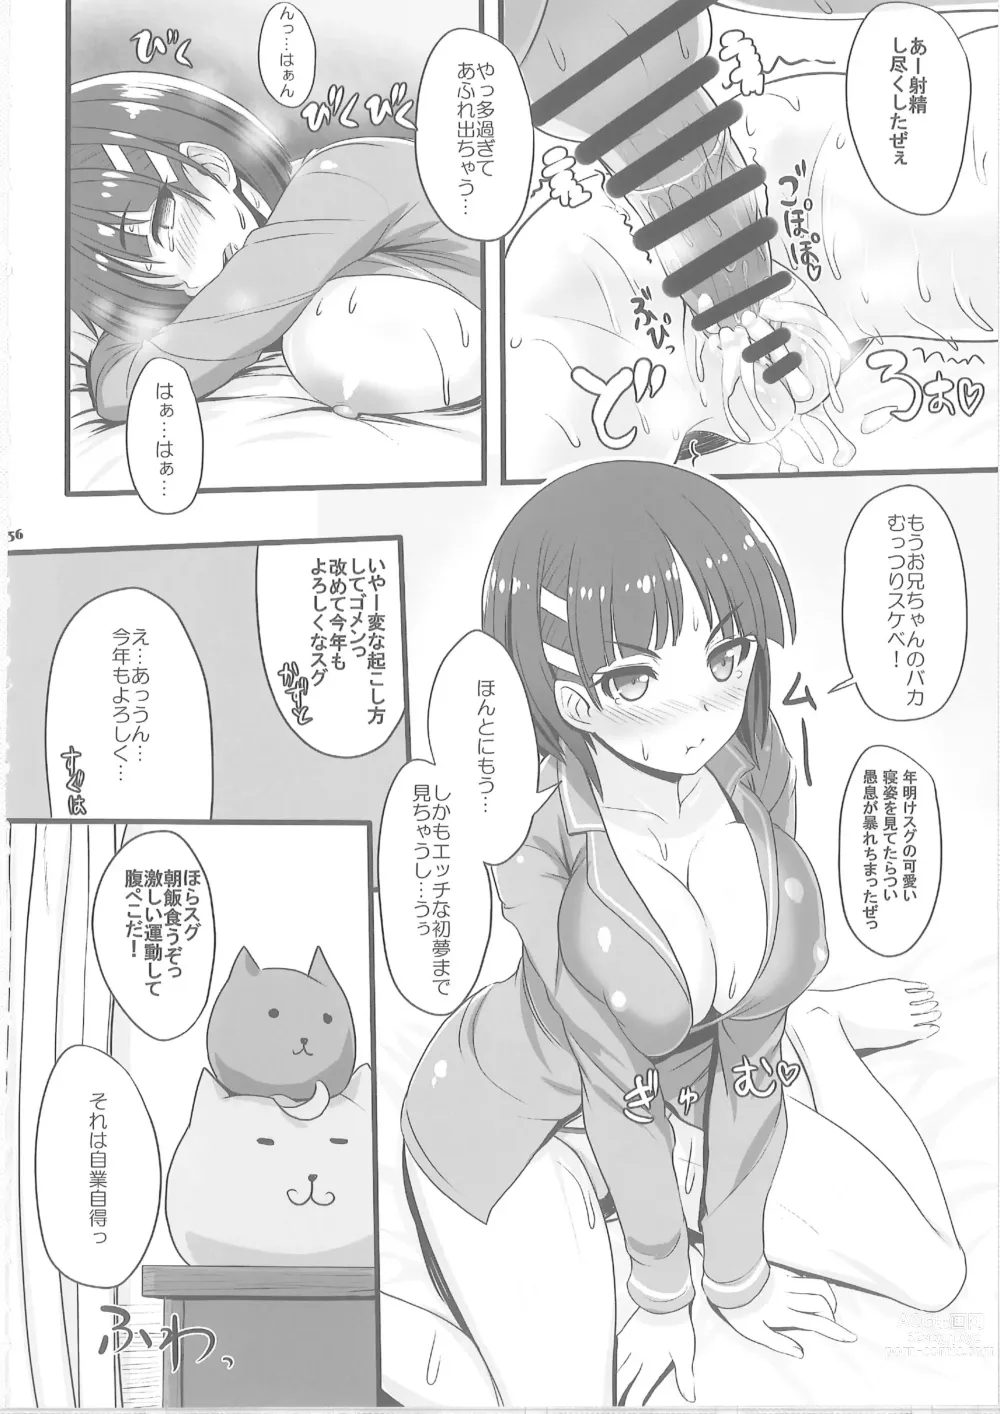 Page 55 of doujinshi Sister Affection On＆Off 2 SAO Soushuuhen